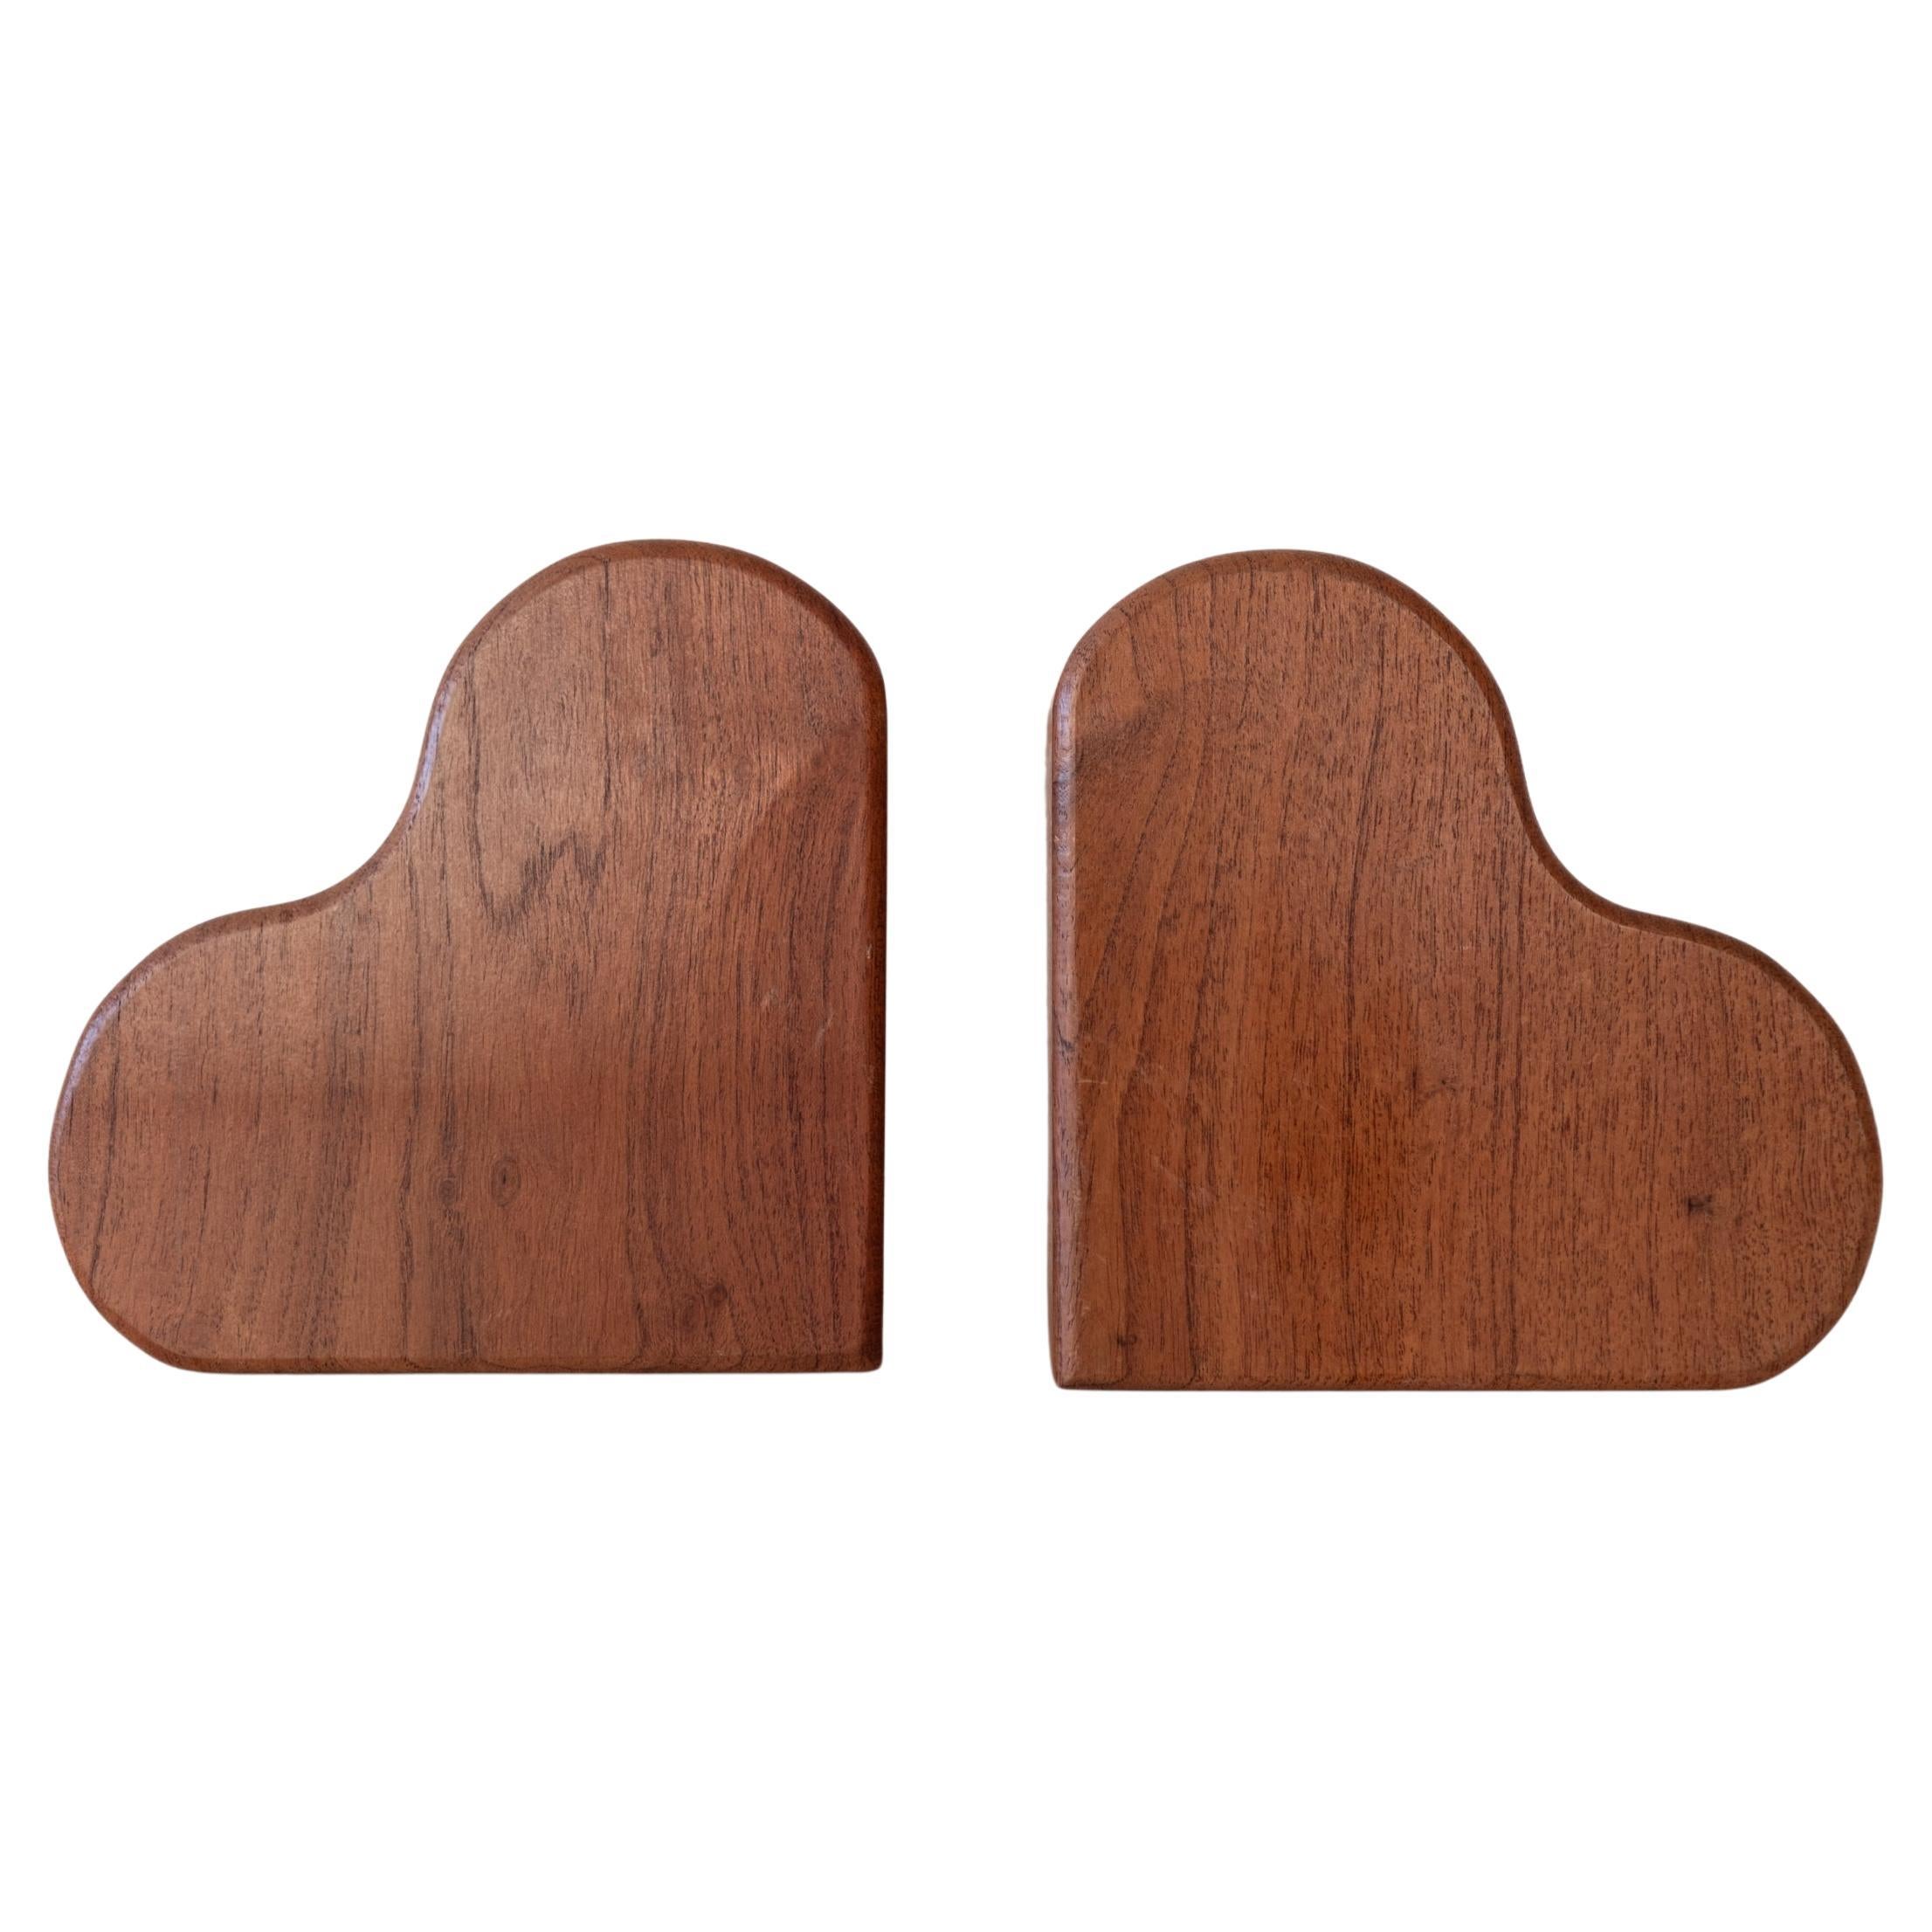 Studio Crafted Wood Heart Bookends  For Sale